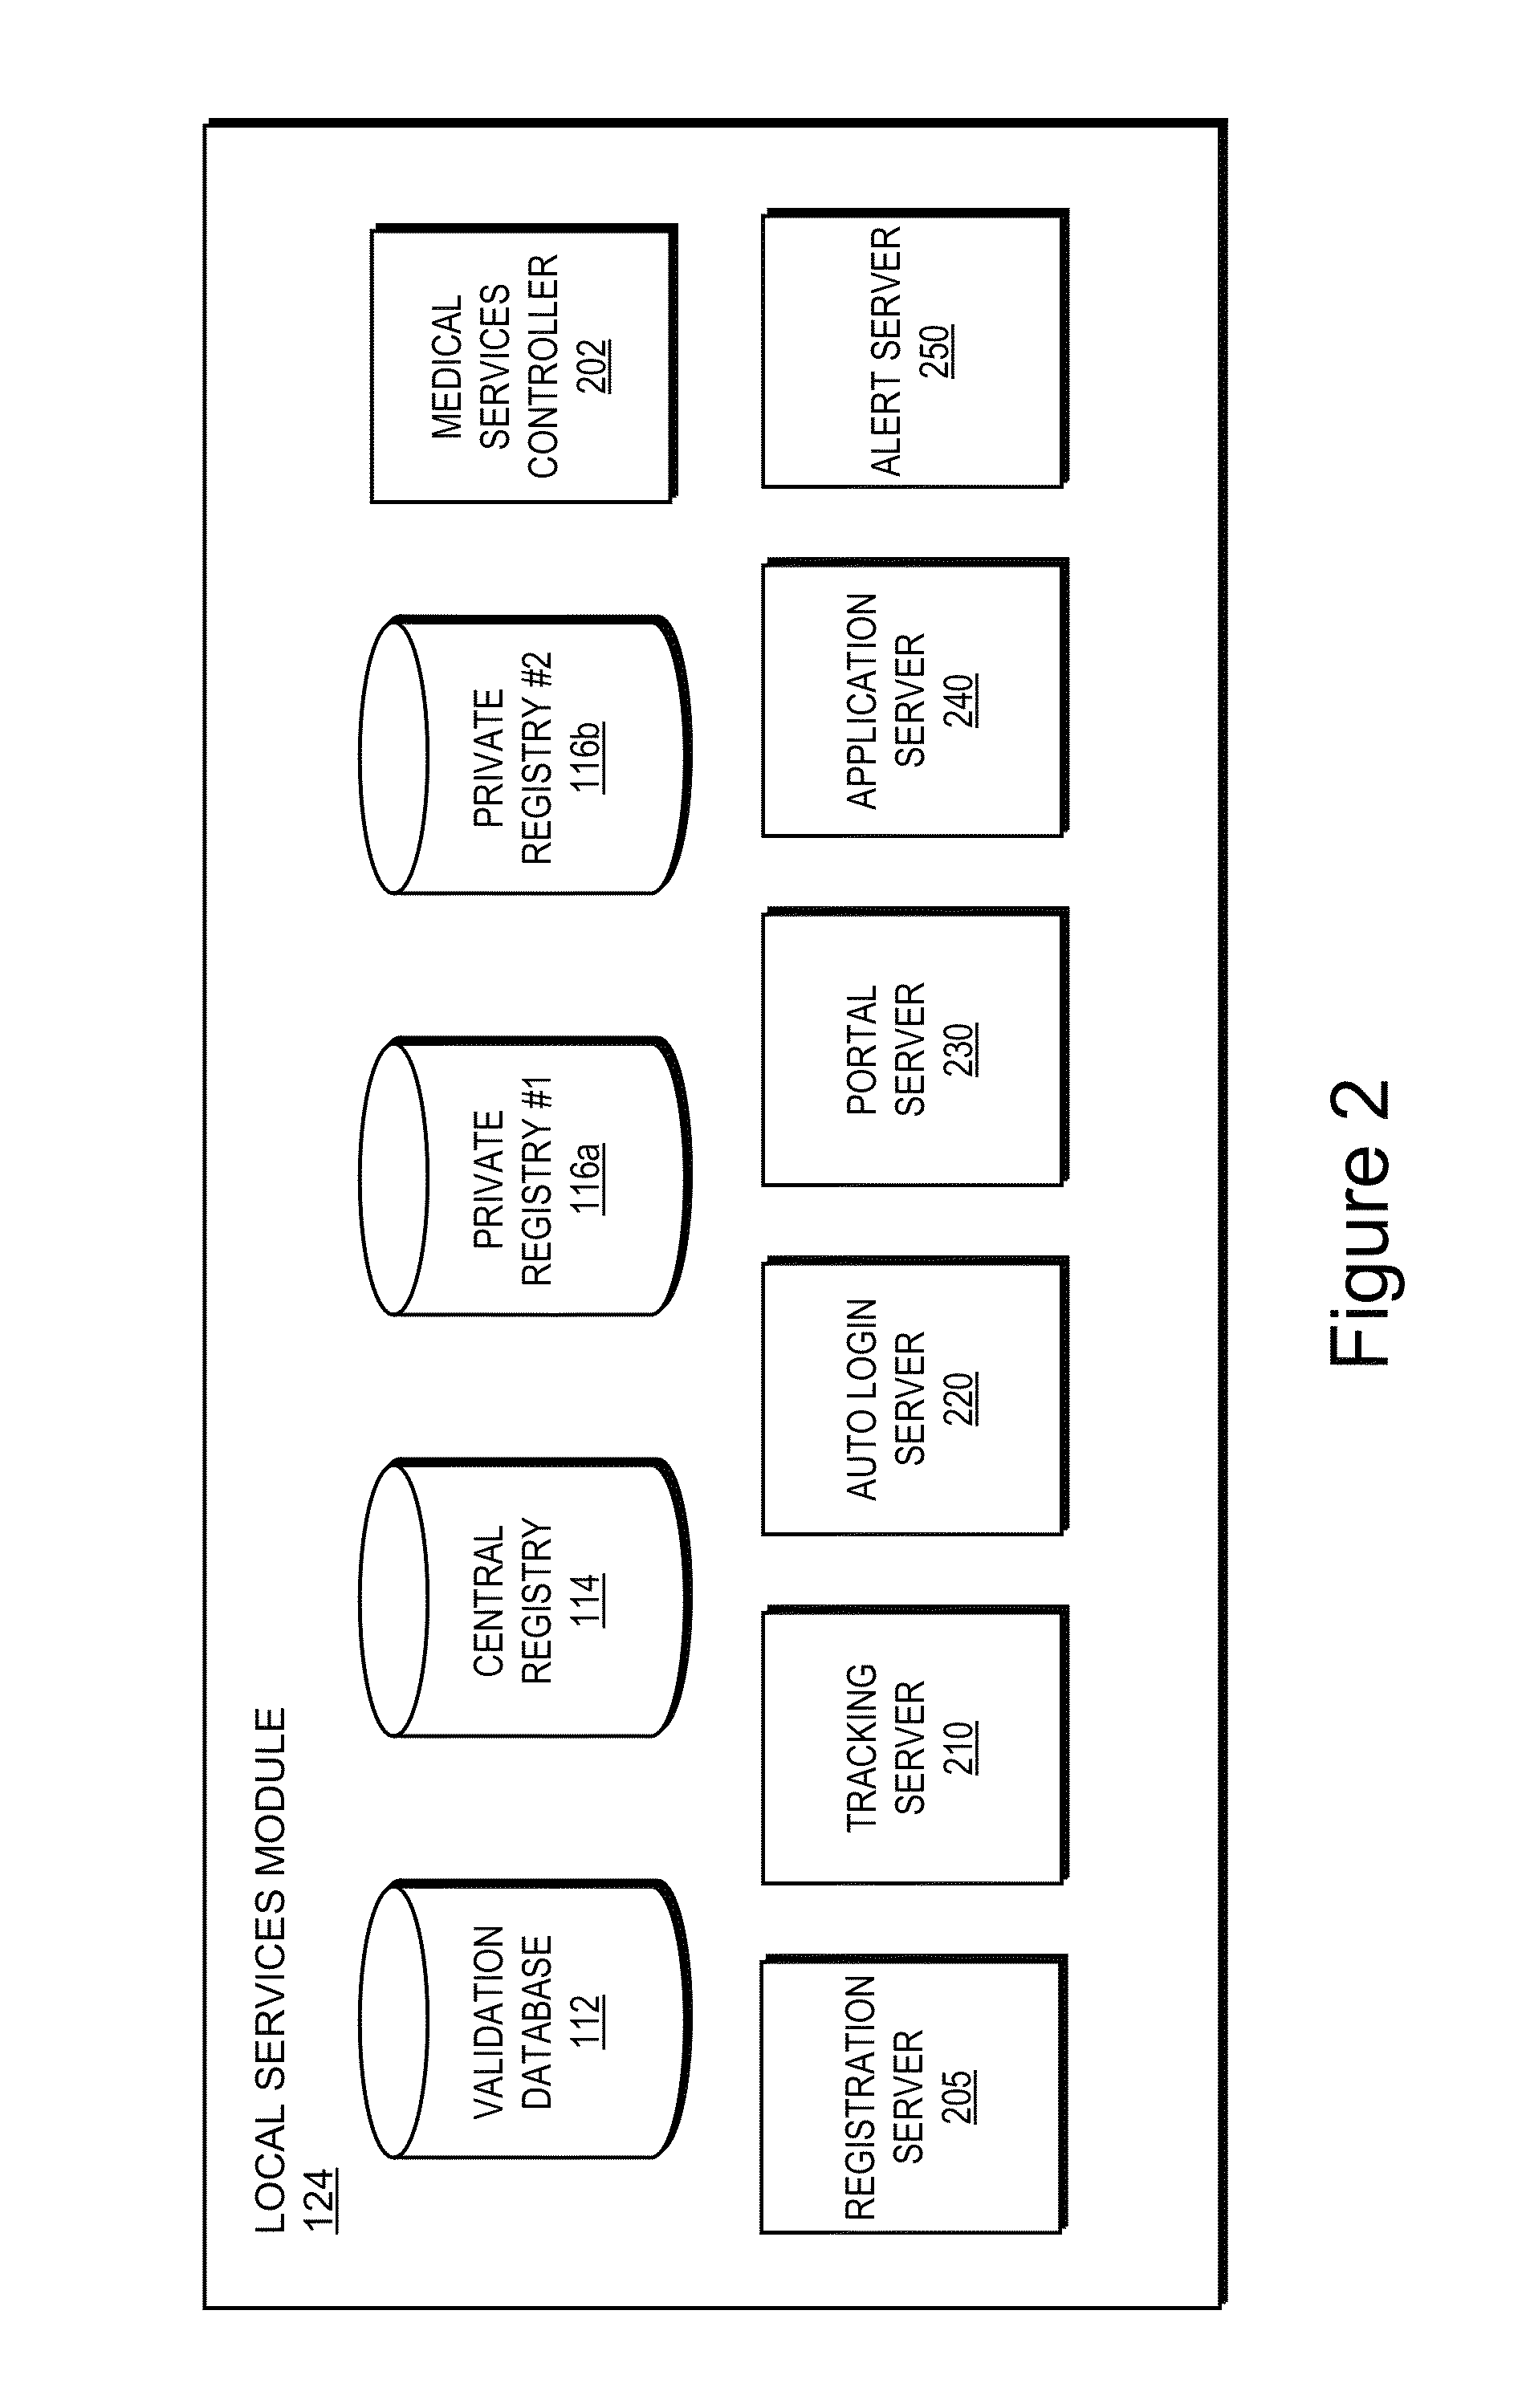 Proximity-based system for automatic application initialization